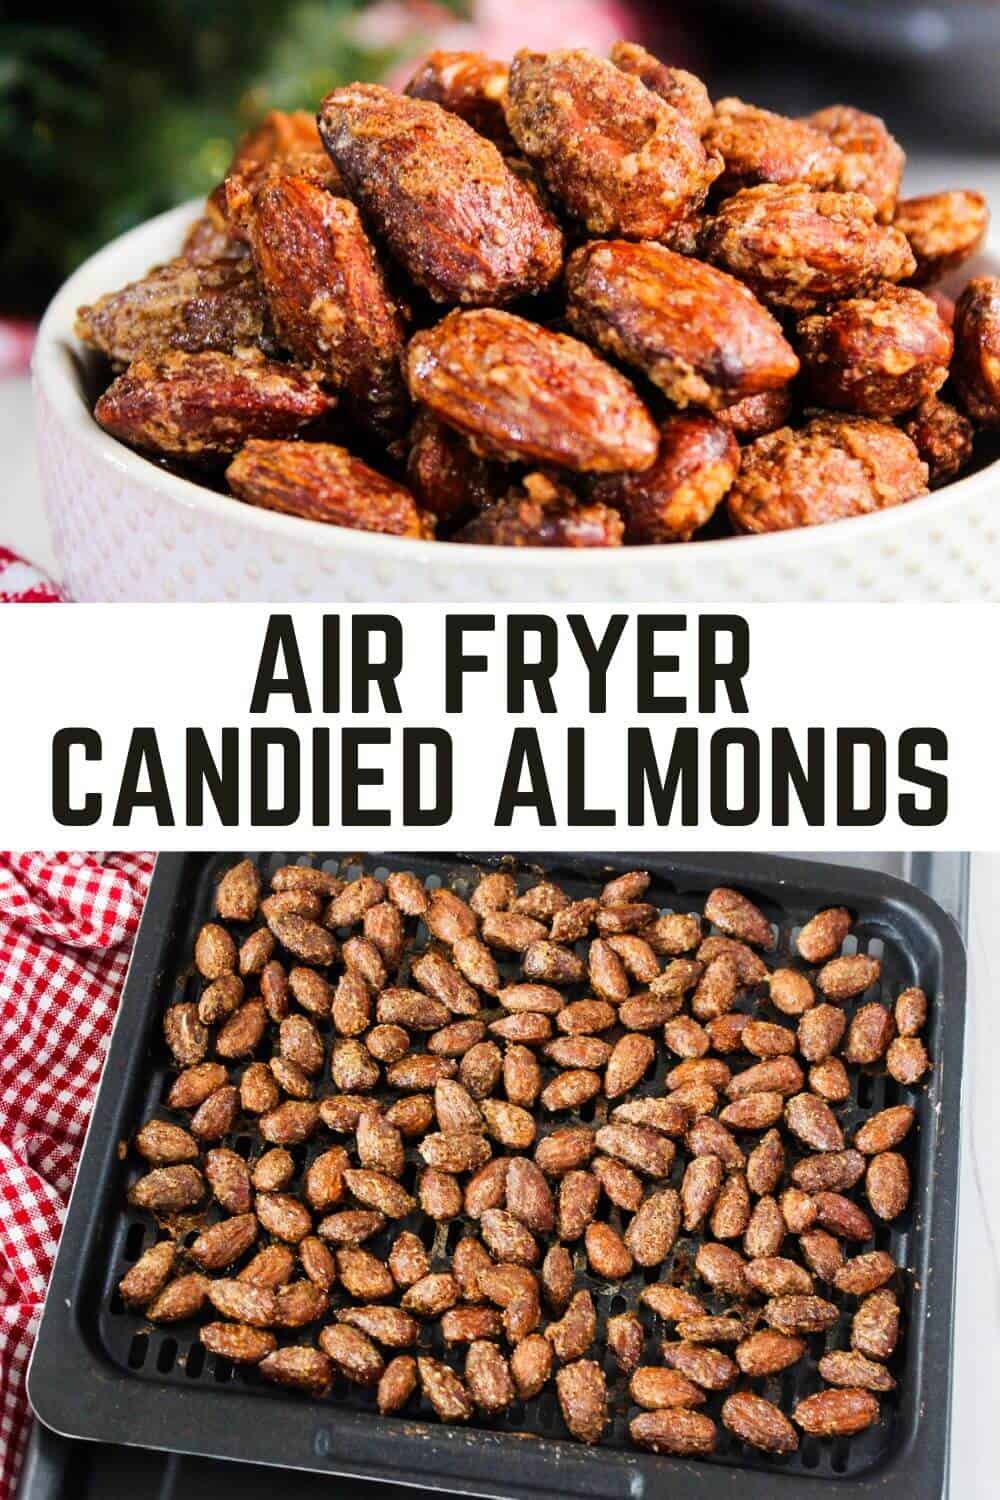 Delicious candied almonds made in an air fryer.